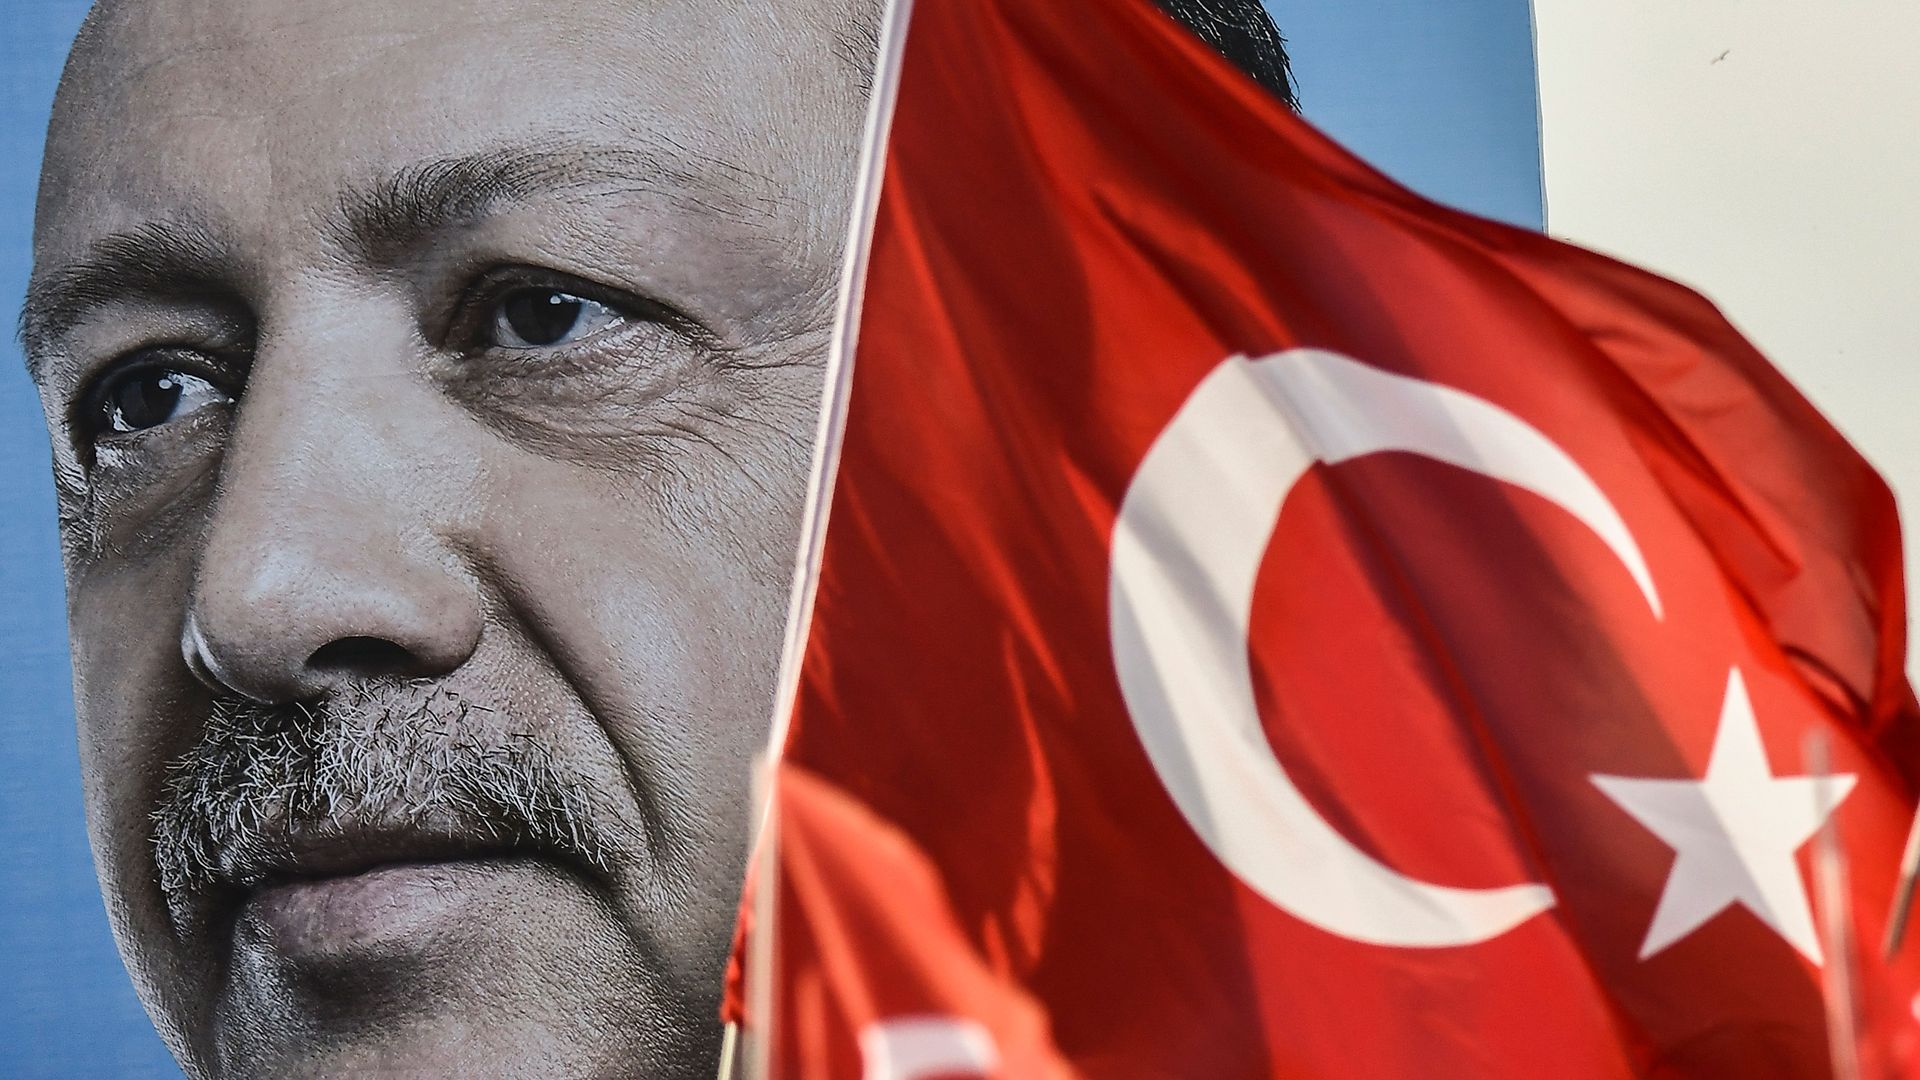 A giant campaign poster of Turkey's President Erdogan next to a Turkish flag.